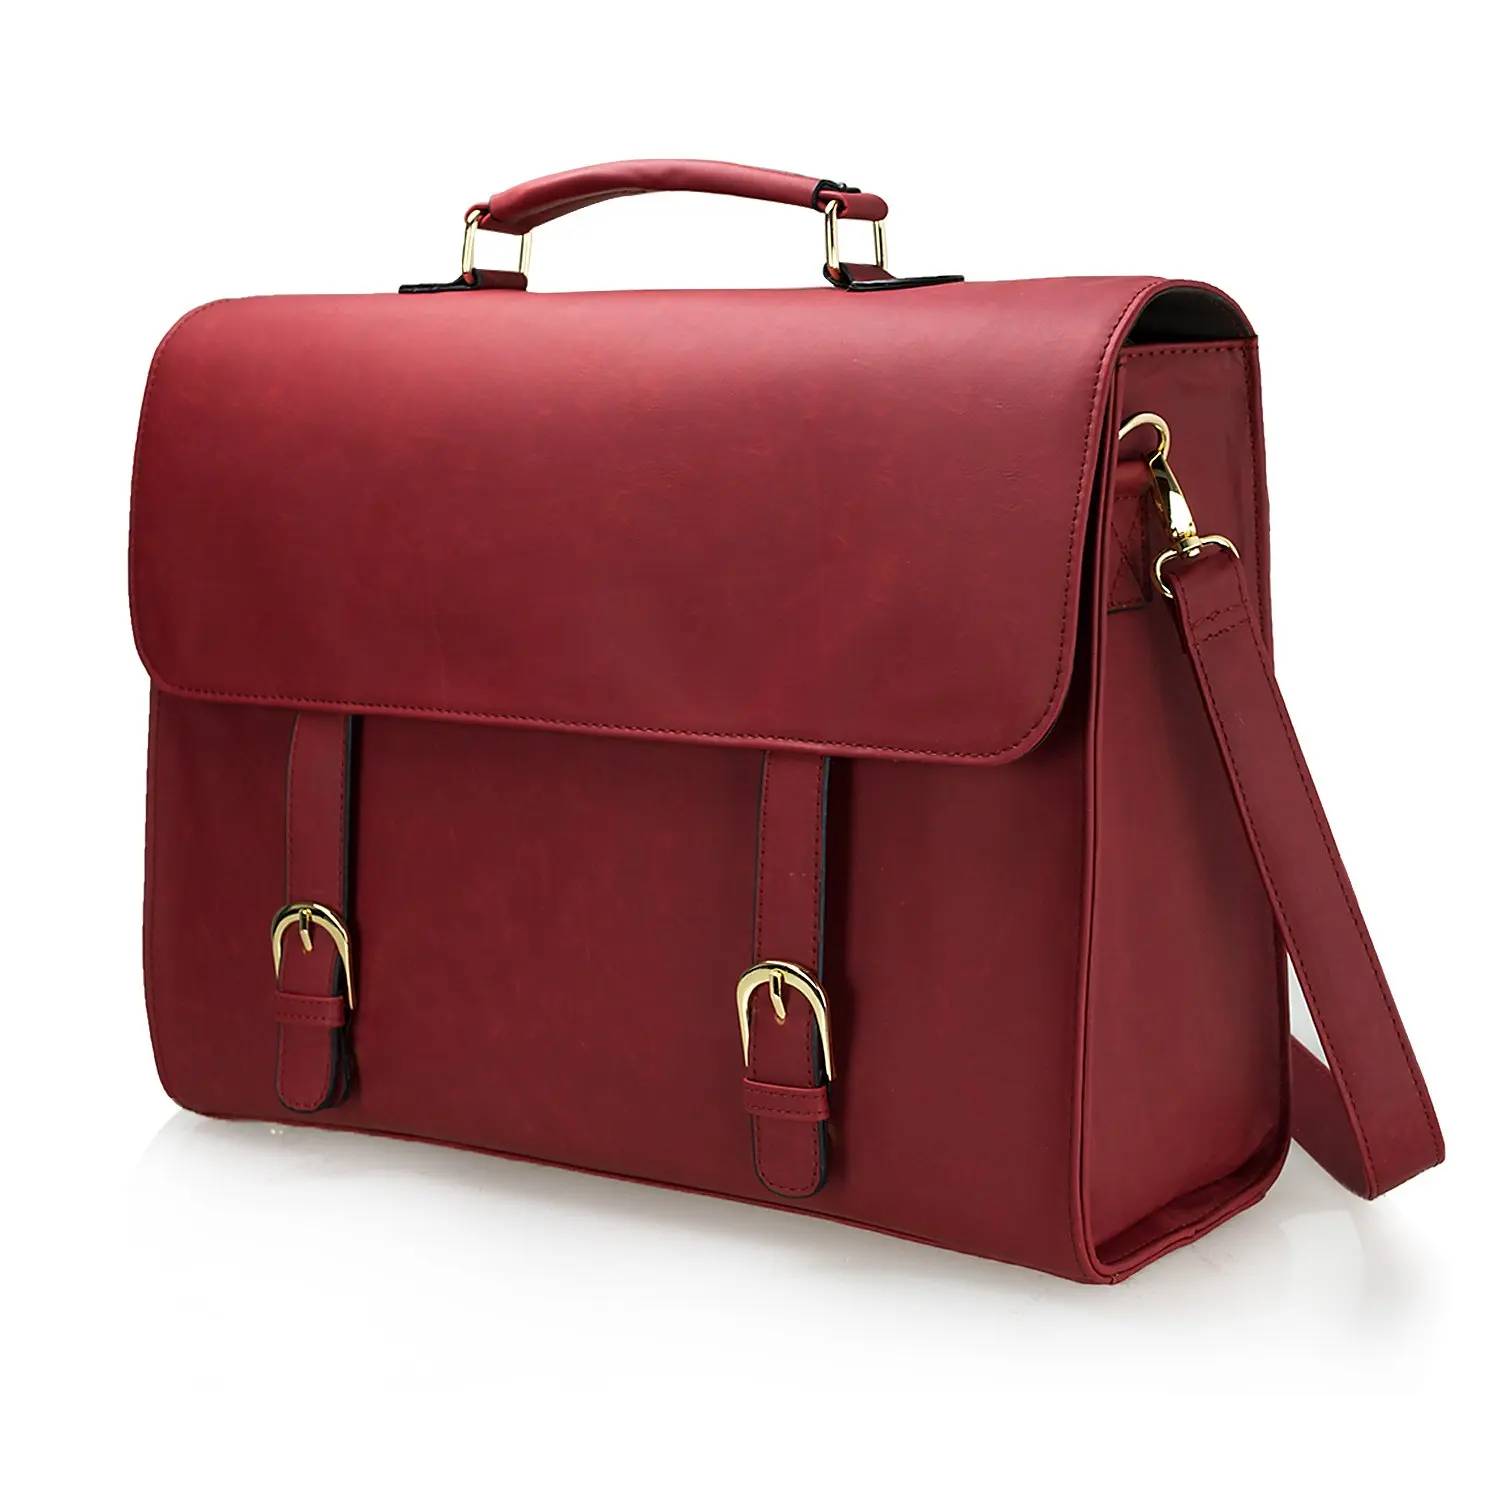 Briefcase for Women Oil Wax Leather Vintage 15.6 Inch Laptop Business Shoulder Bag Coffee 